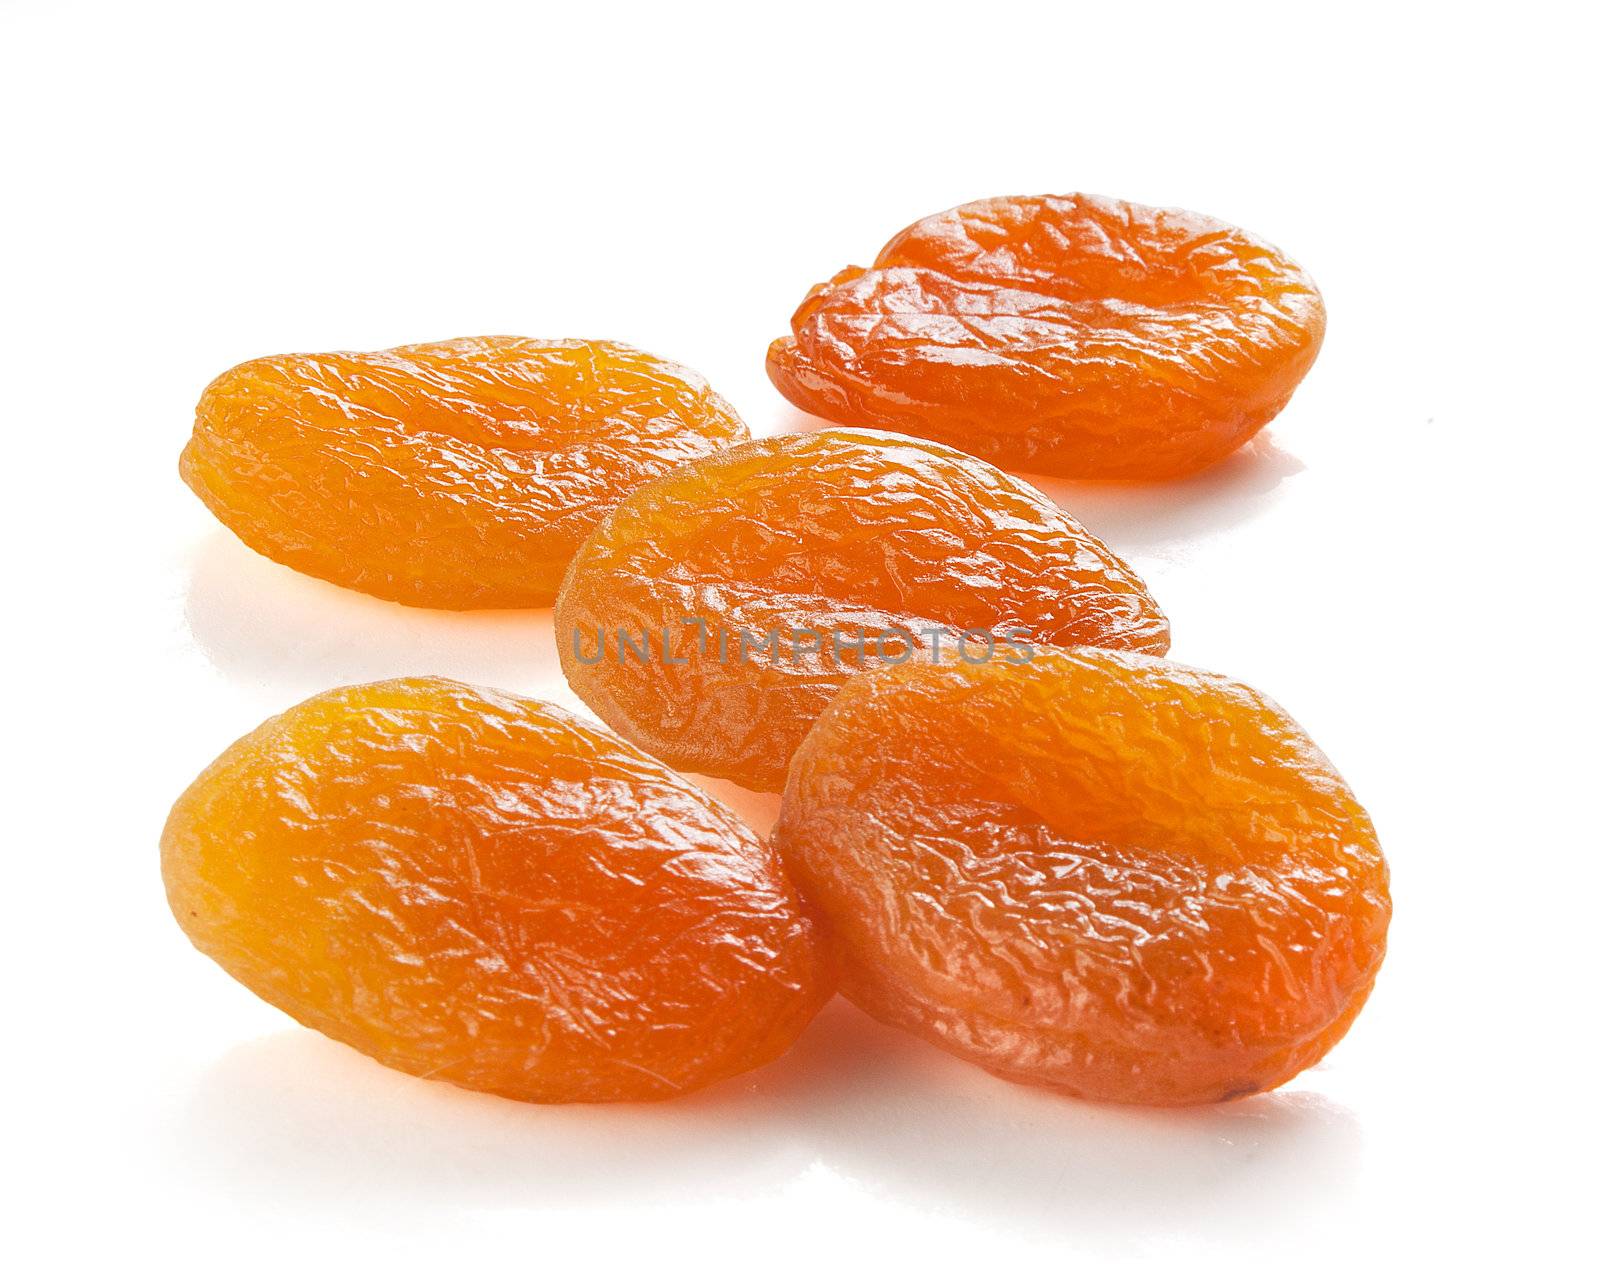 Dried apricots by Angorius